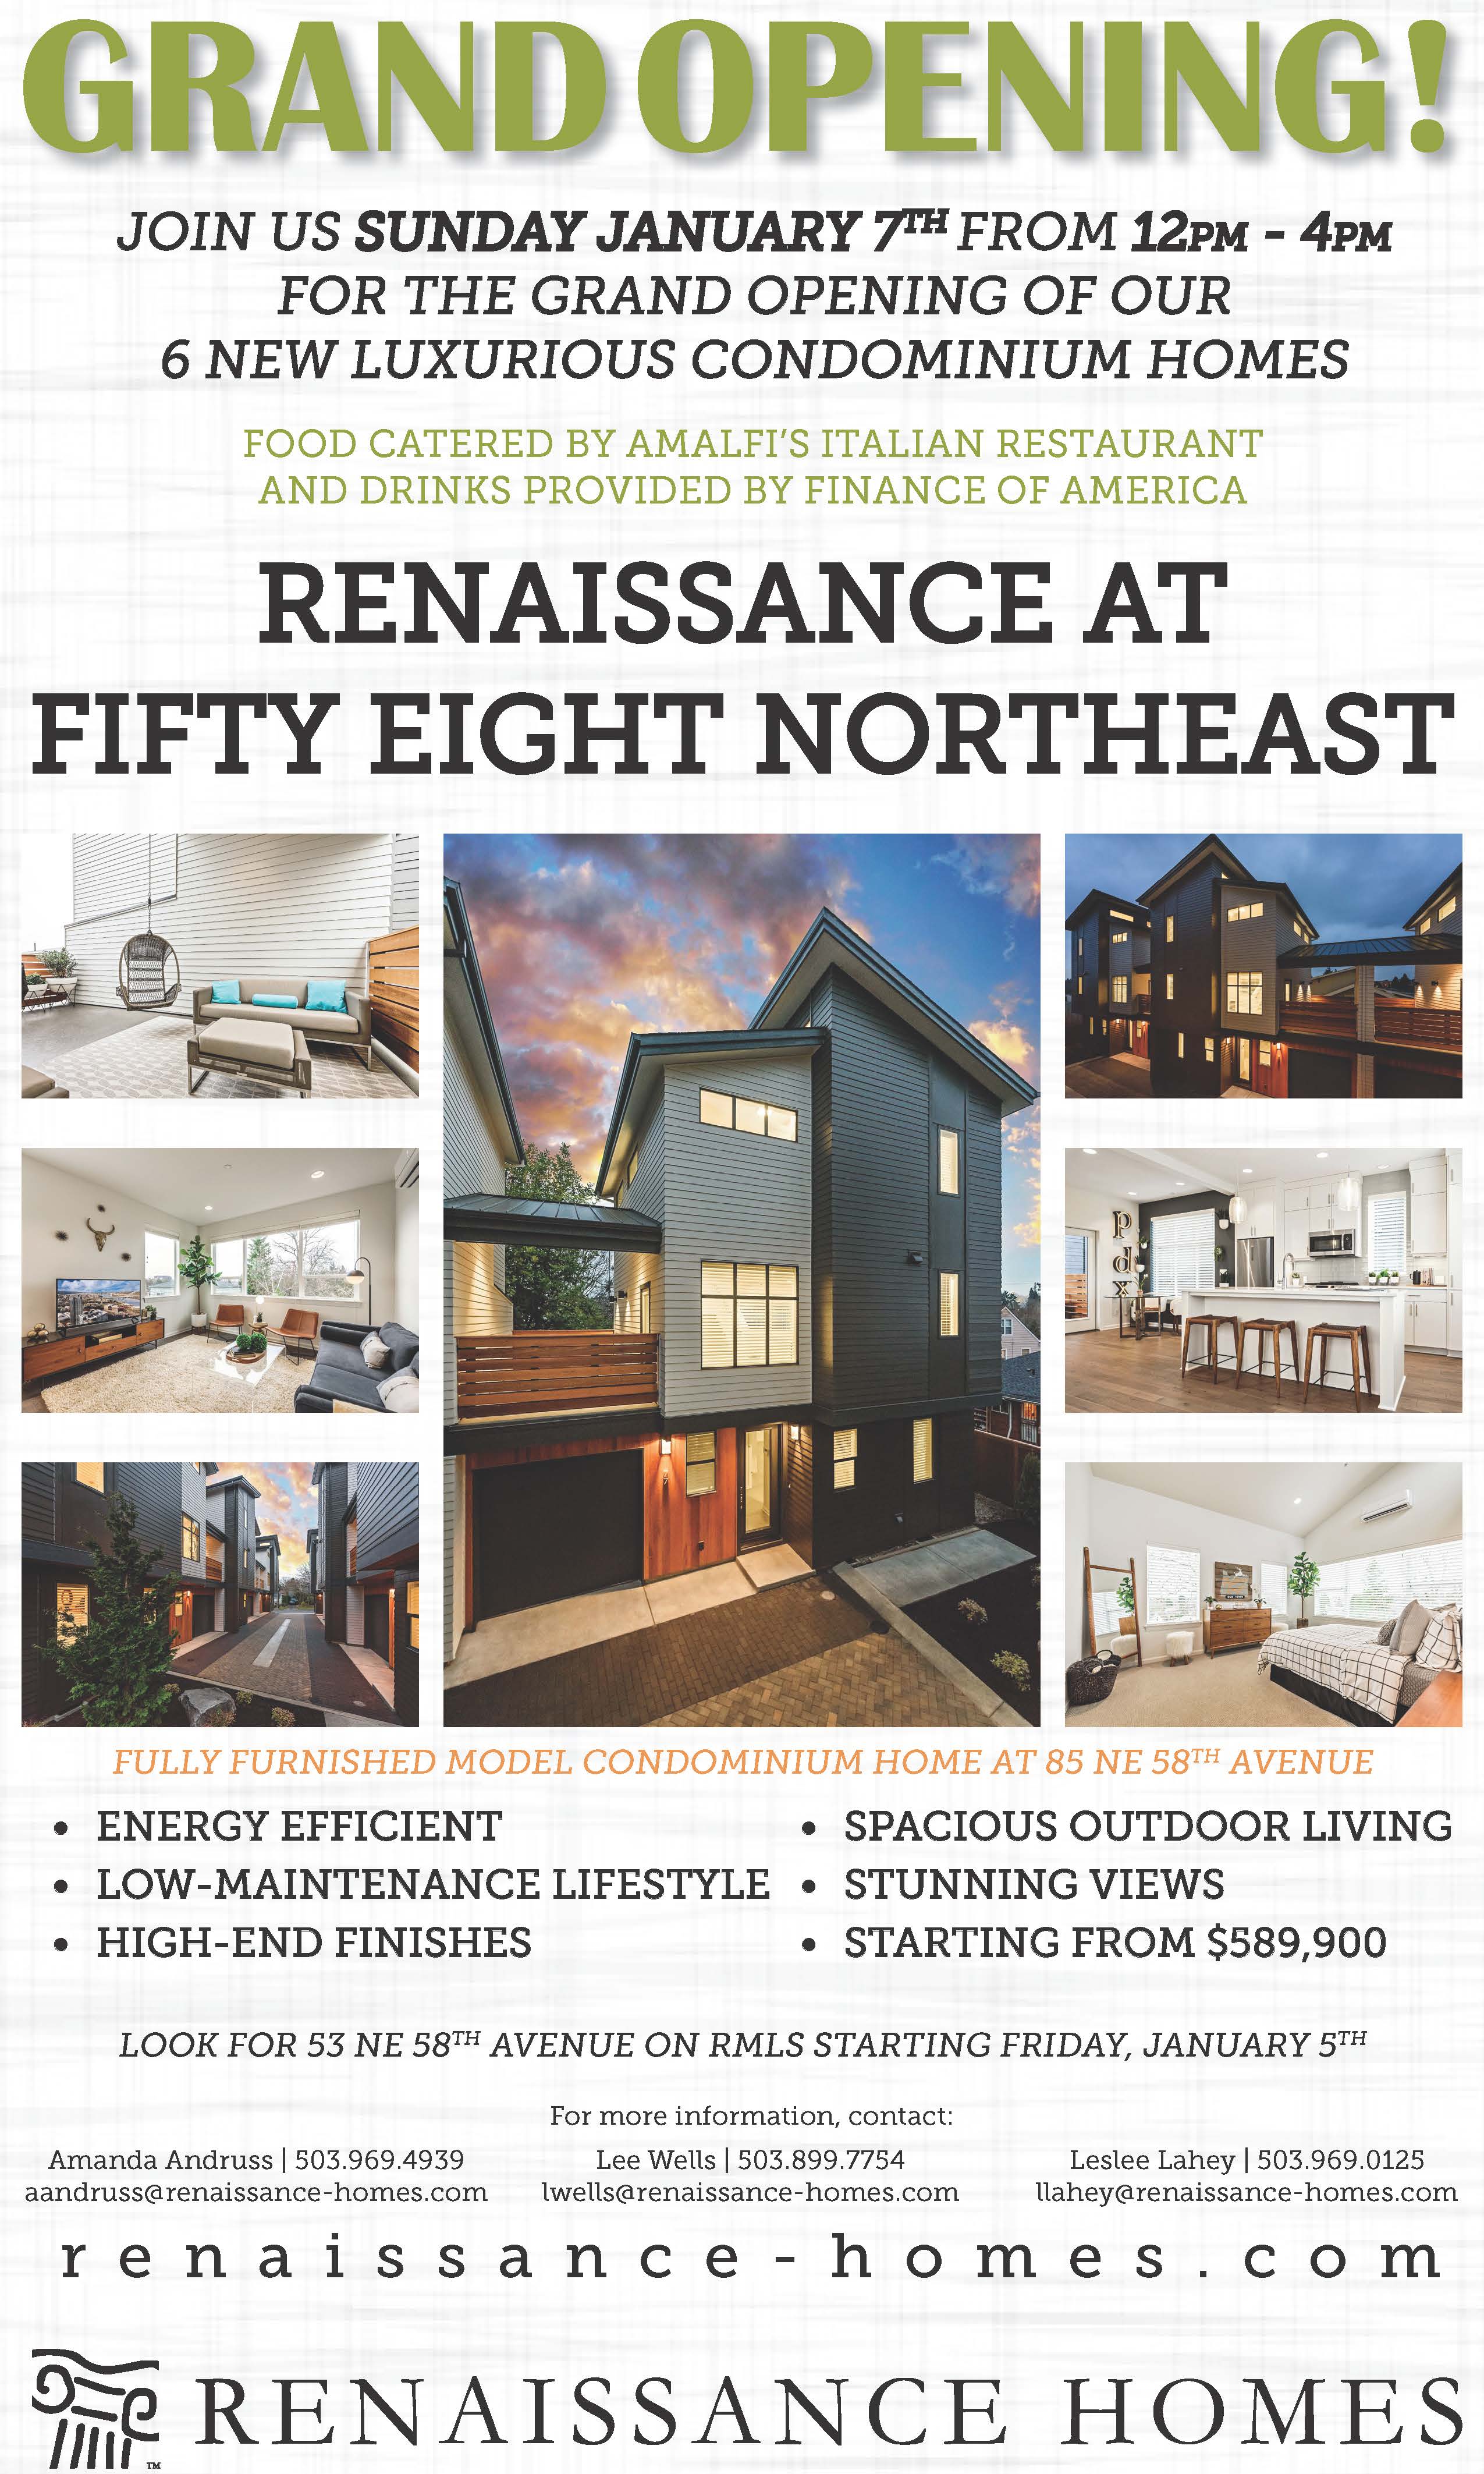 Fiftyeight Northeast Condominums in Lake Oswego OR - Renaissance Homes